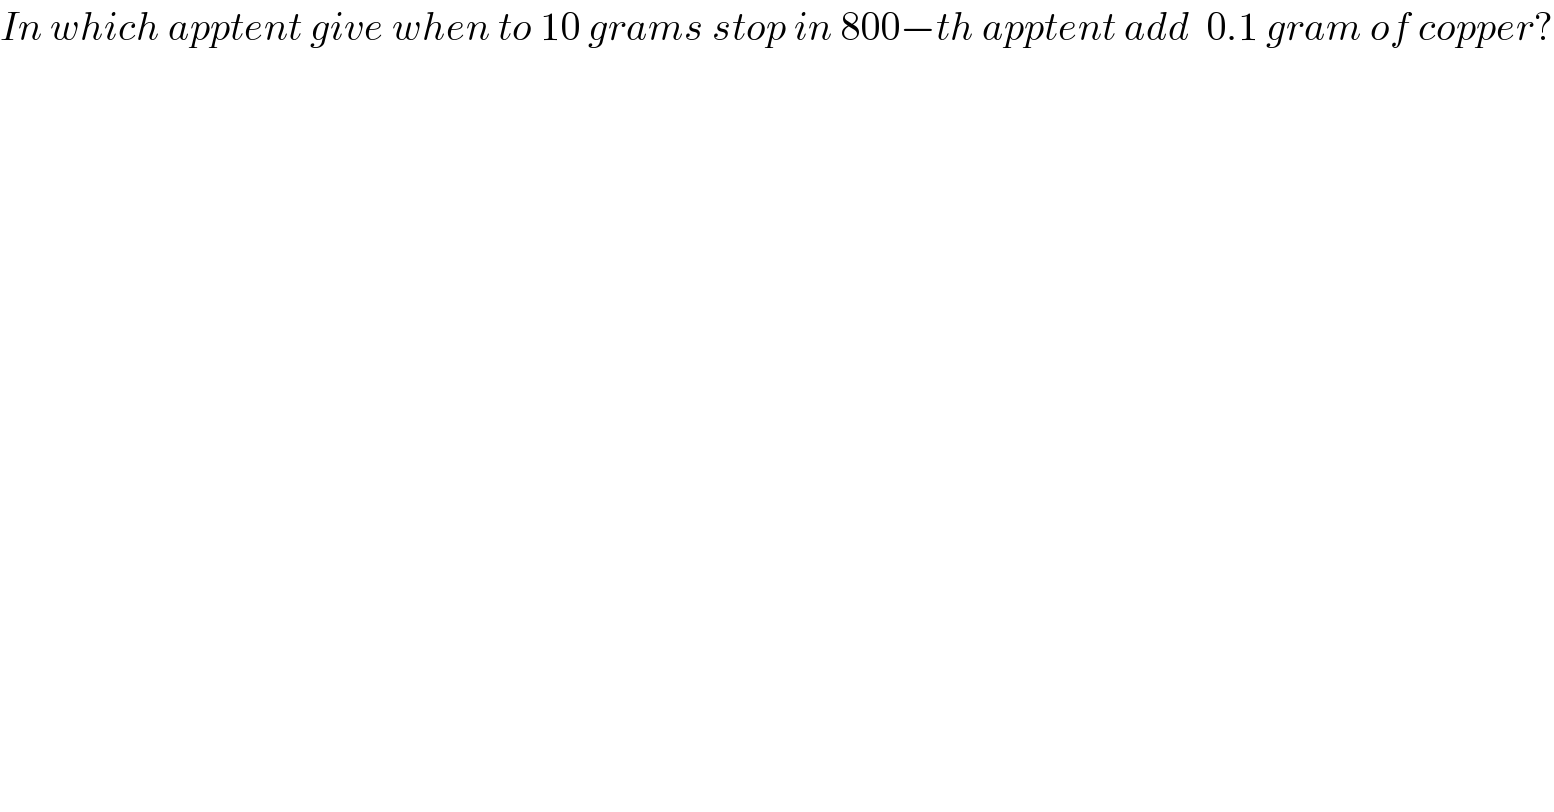 In which apptent give when to 10 grams stop in 800−th apptent add  0.1 gram of copper?  